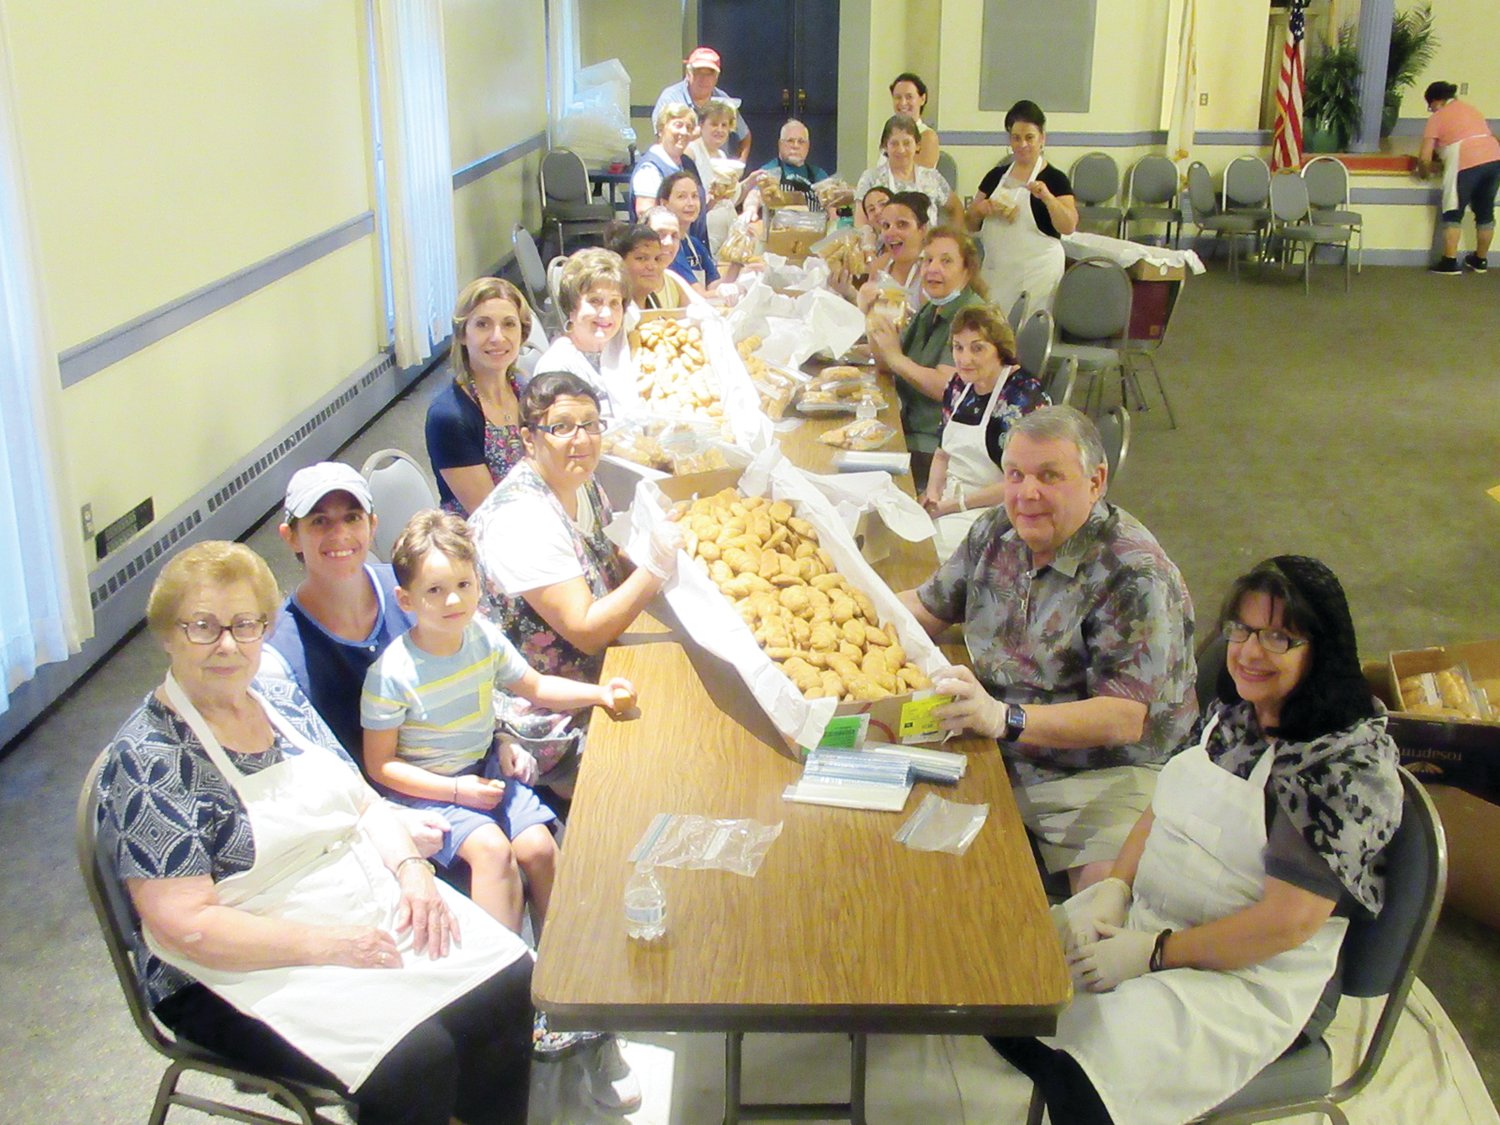 BAKING BRIGADE: This is just one example of the many proud parishioners at Church of the Annunciation who spent many recent nights making and baking what resulted in upwards of 40,000 Greek goodies that will be on sale during the 36TH Annual Cranston Greek Festival this weekend.